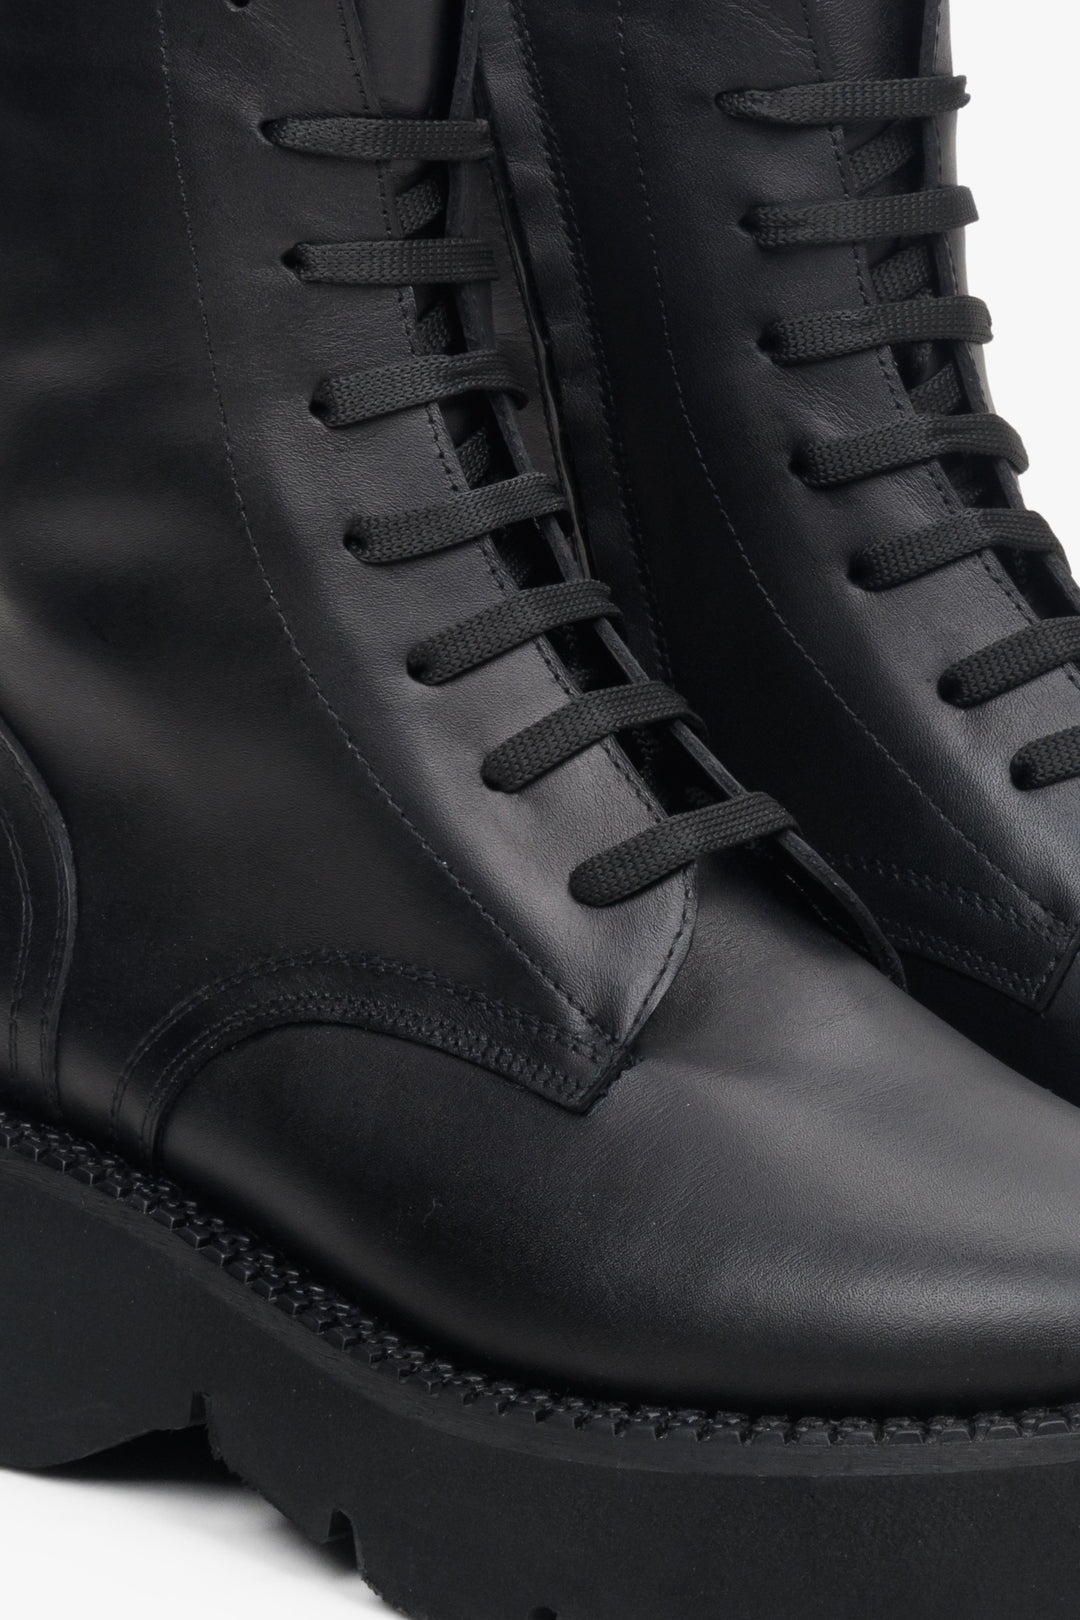 Women's black leather  winter boots by Estro - close-up on the lacing system.